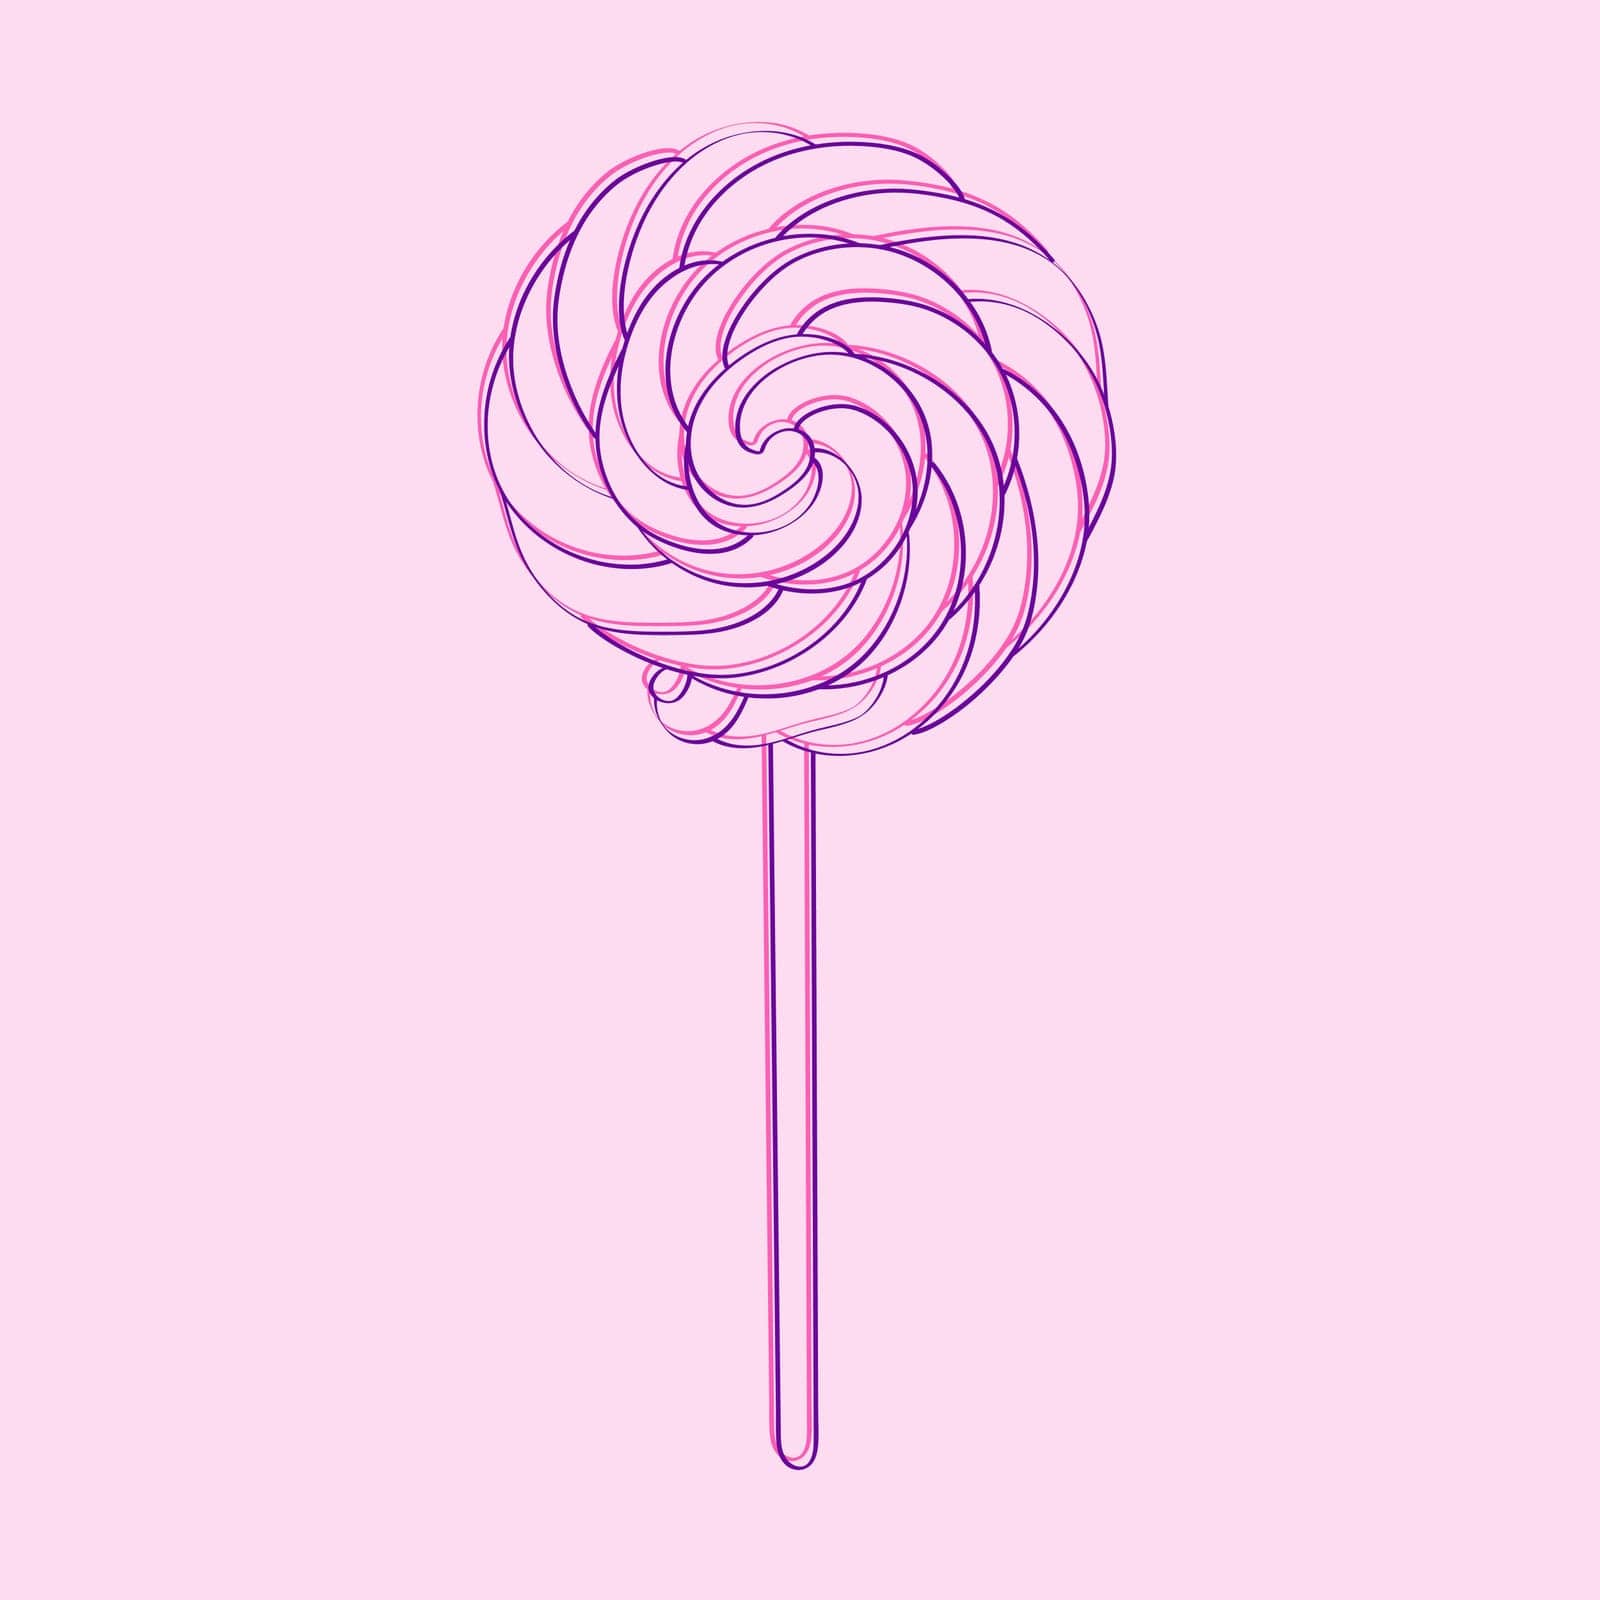 A pink lollipop, hand-painted with doodle designs, stands on a soft pink background. The candies vibrant color pops against the monochromatic backdrop, creating a visually striking contrast